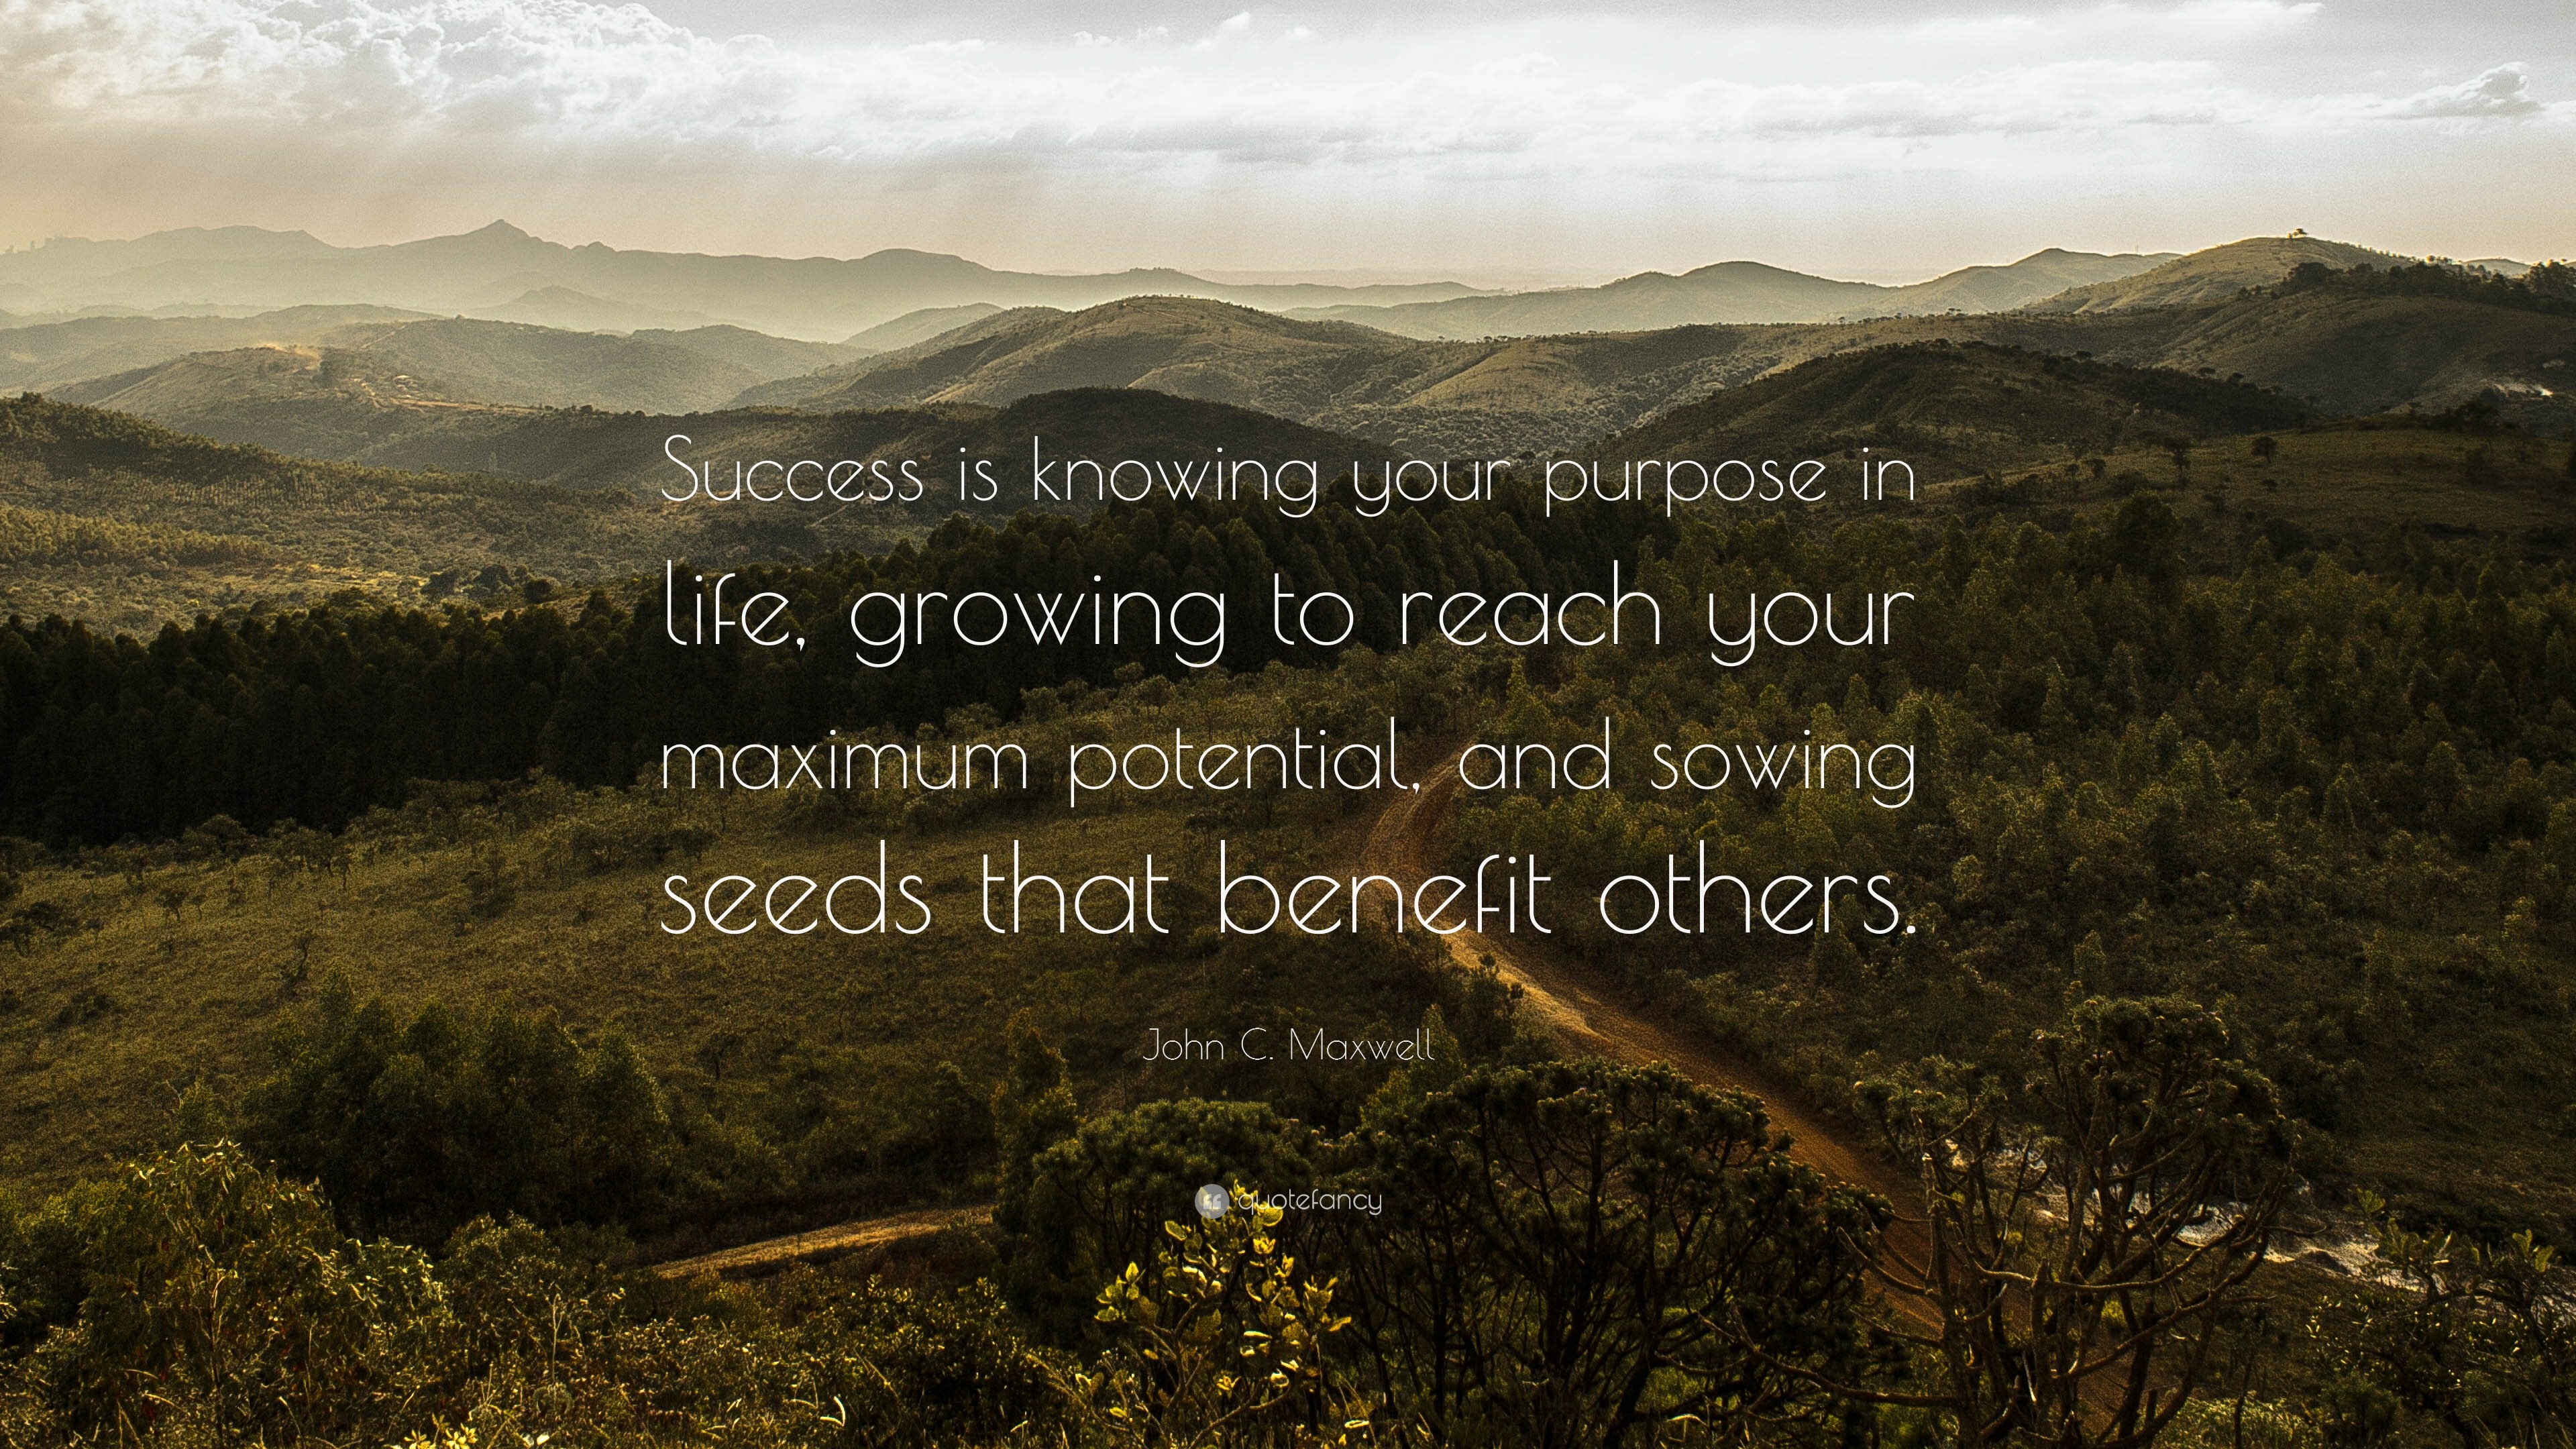 Success Quotes “Success is knowing your purpose in life growing to reach your